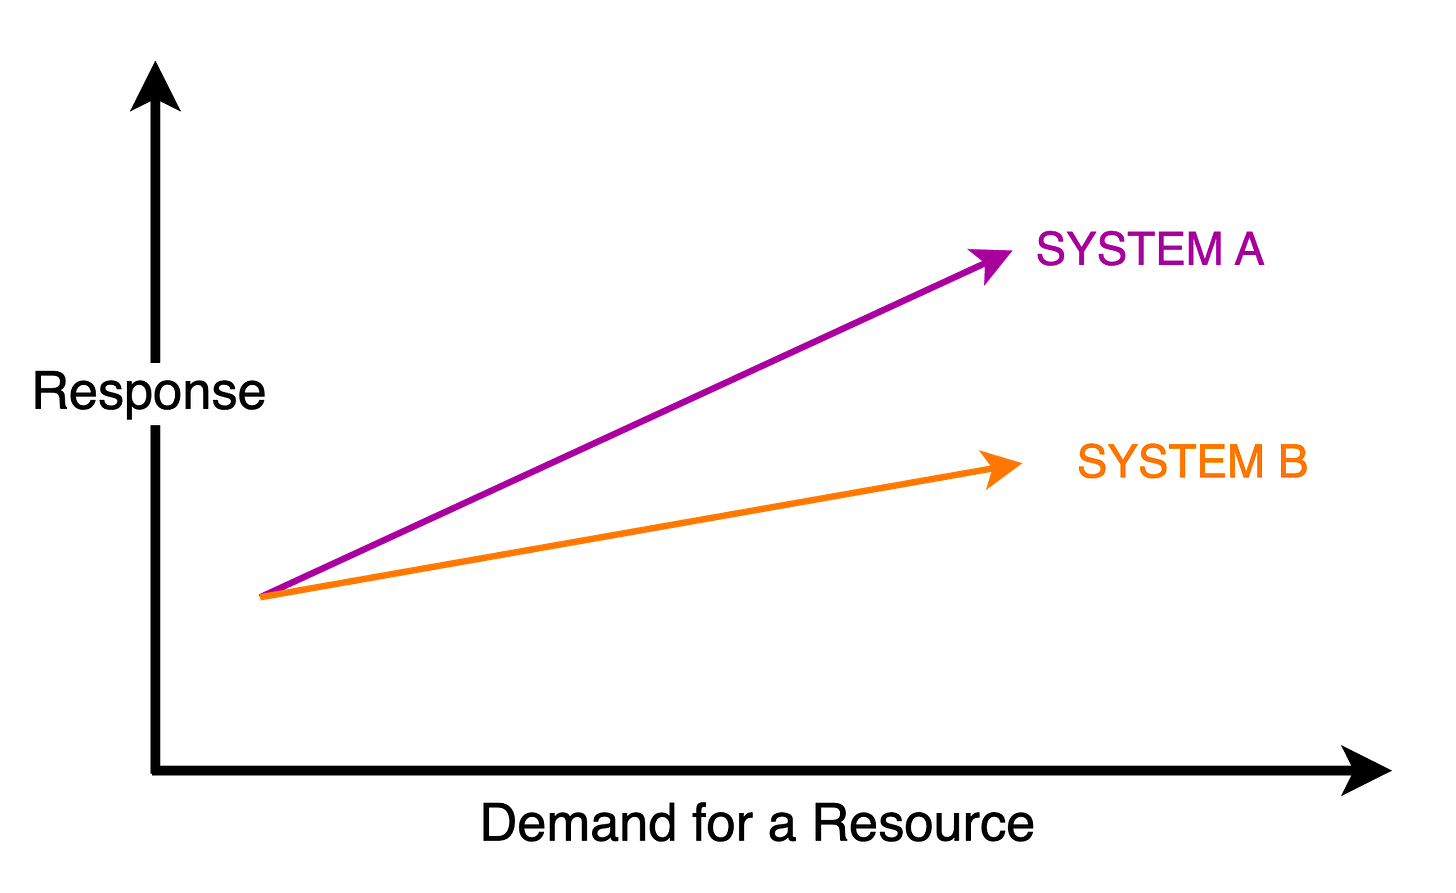 comparing response vs demand for a two systems